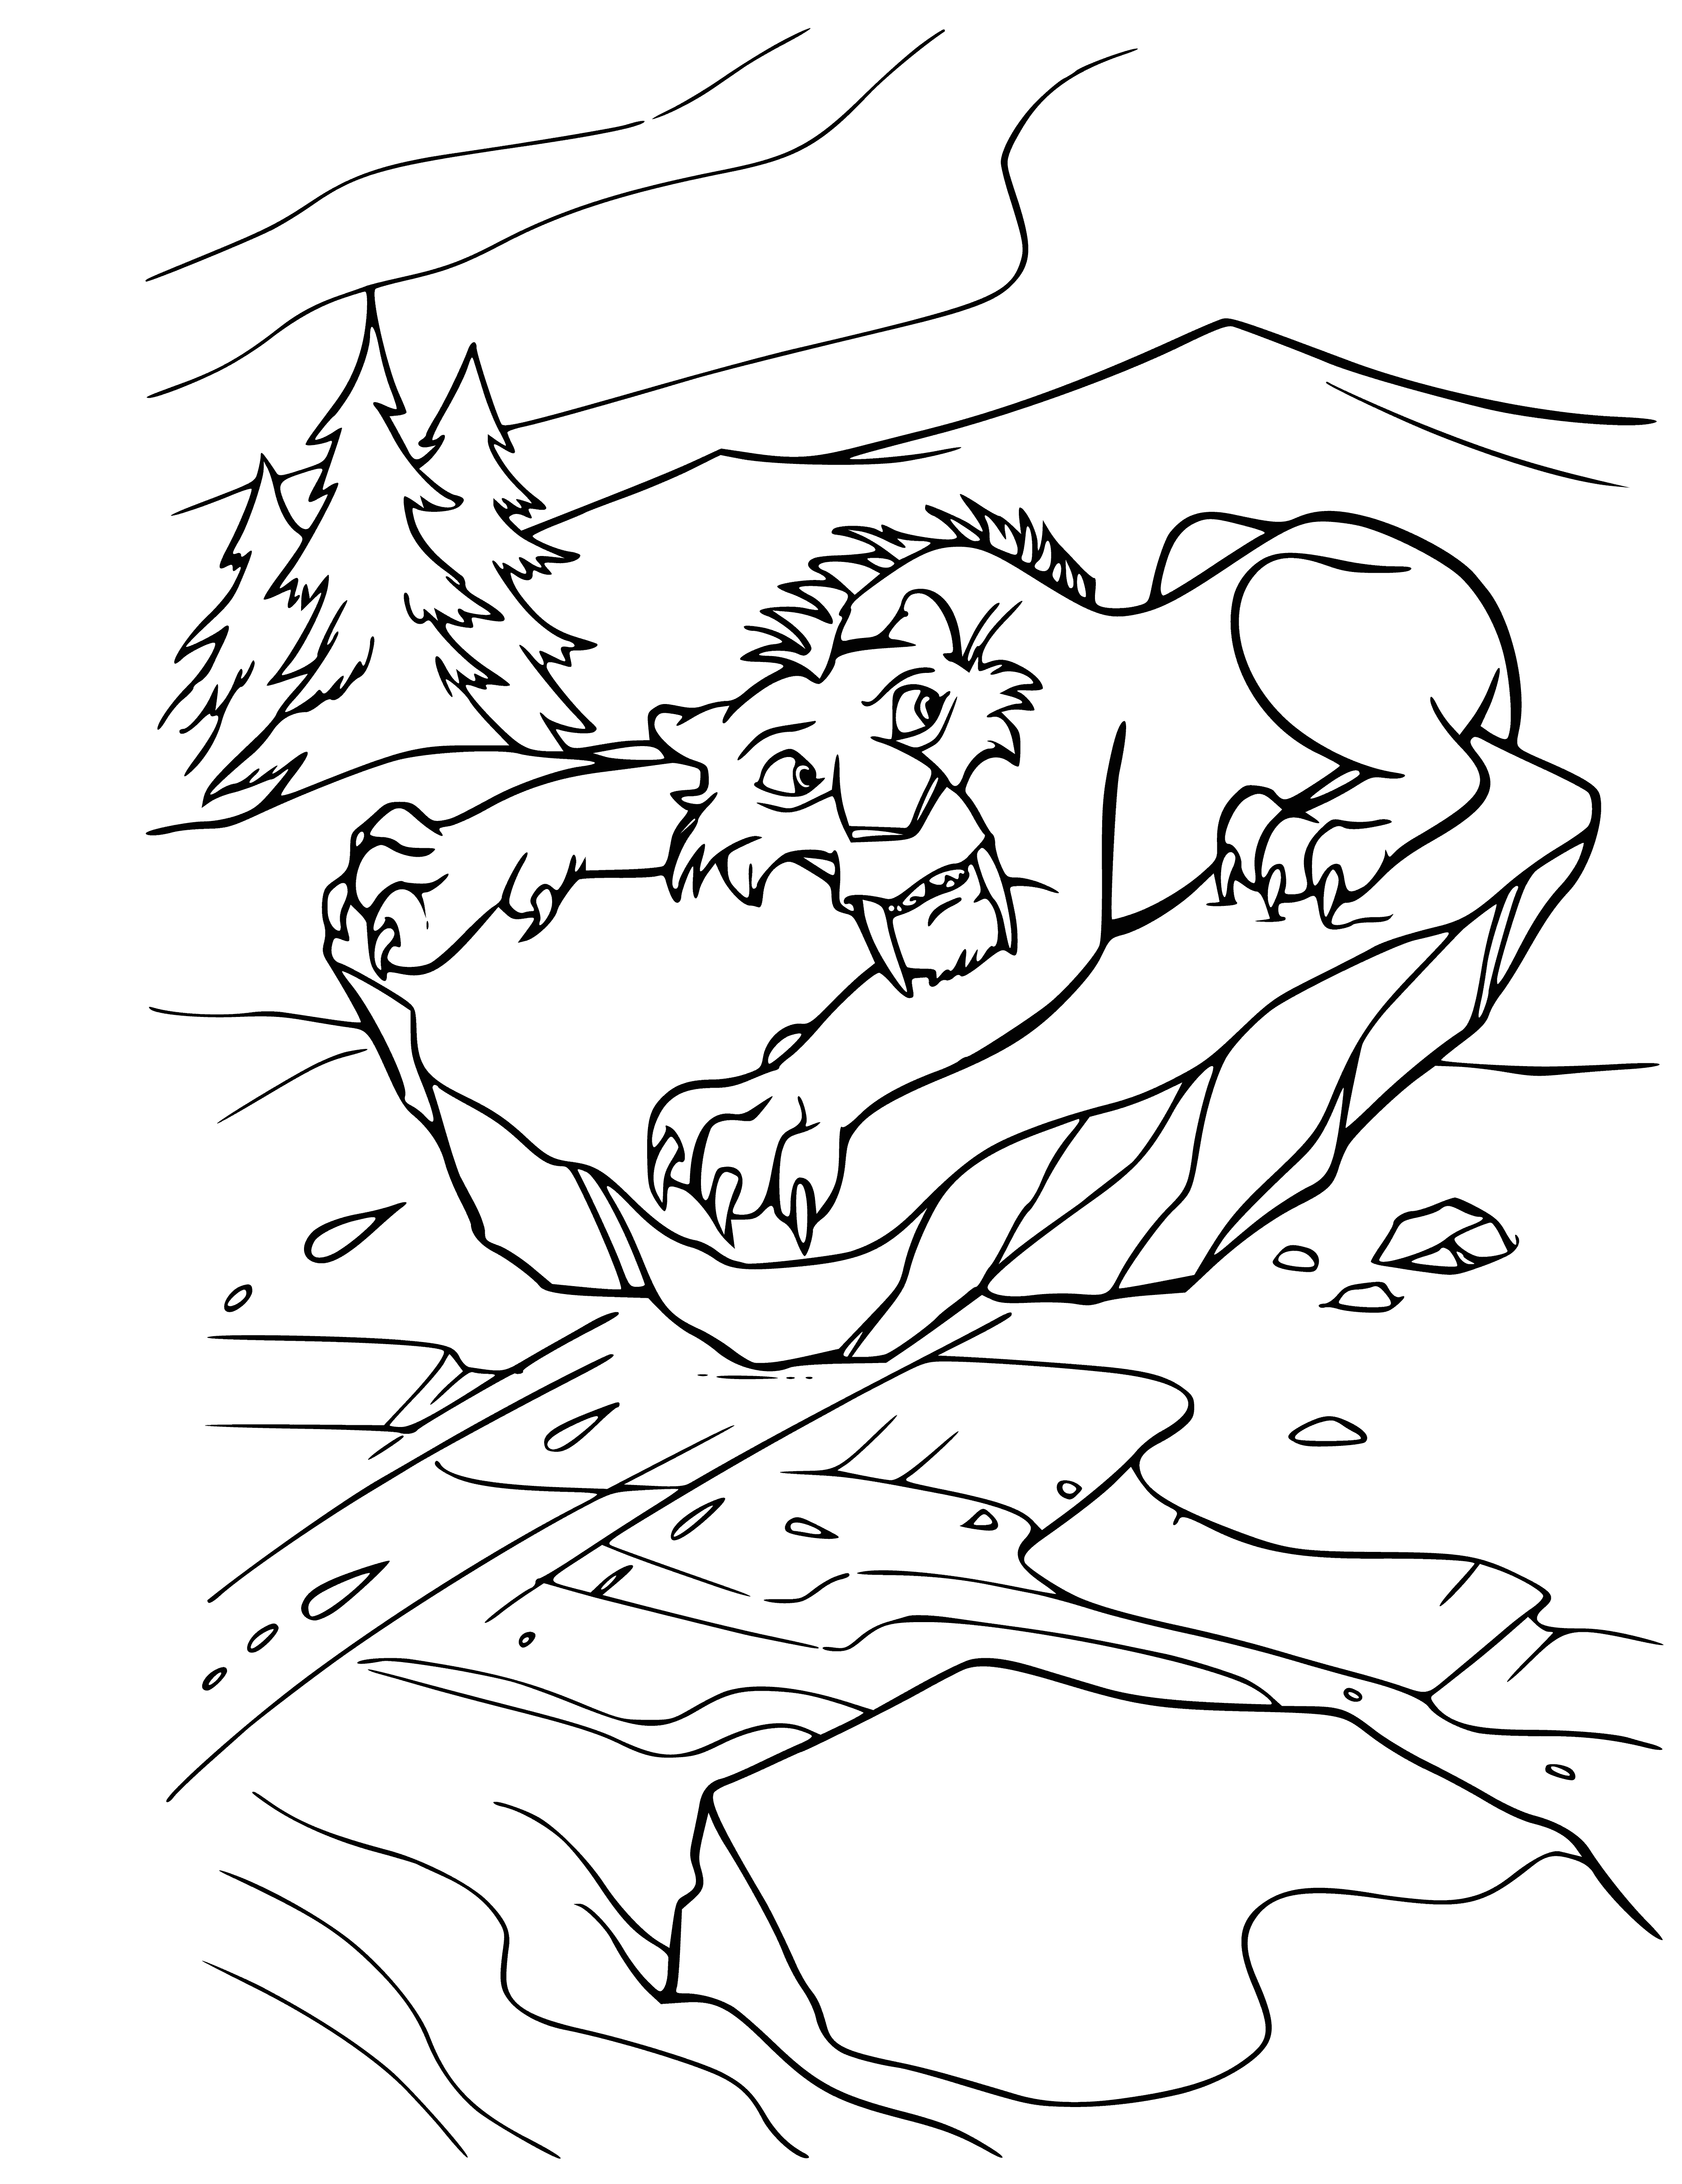 coloring page: Coloring page scene from Ice Age: Diego a saber-toothed tiger who's scared of water.